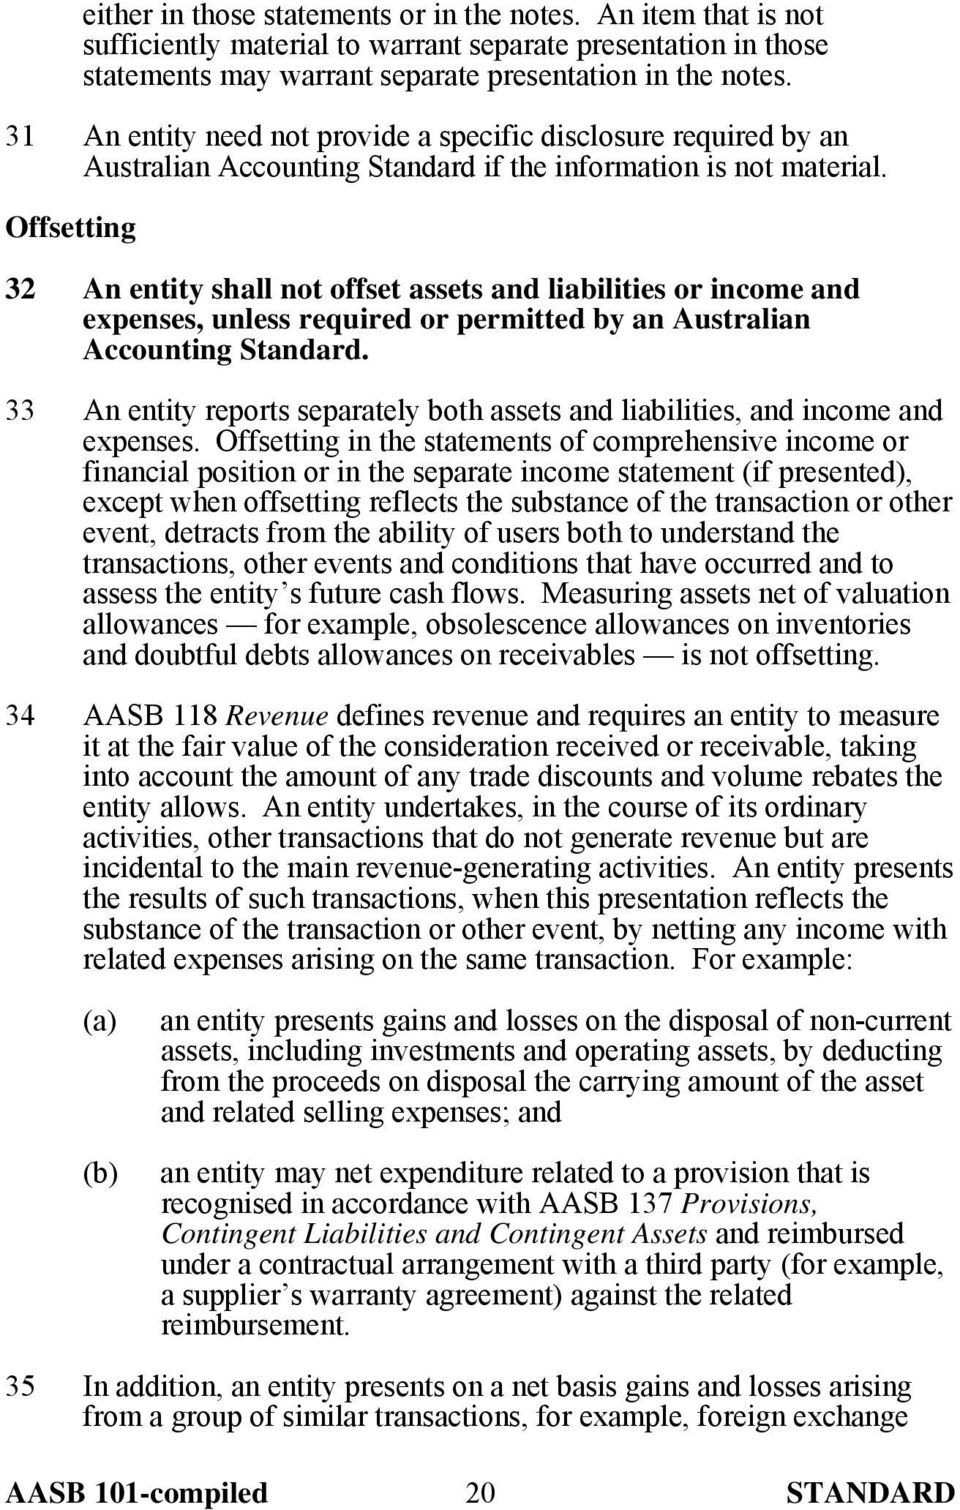 Offsetting 32 An entity shall not offset assets and liabilities or income and expenses, unless required or permitted by an Australian Accounting Standard.